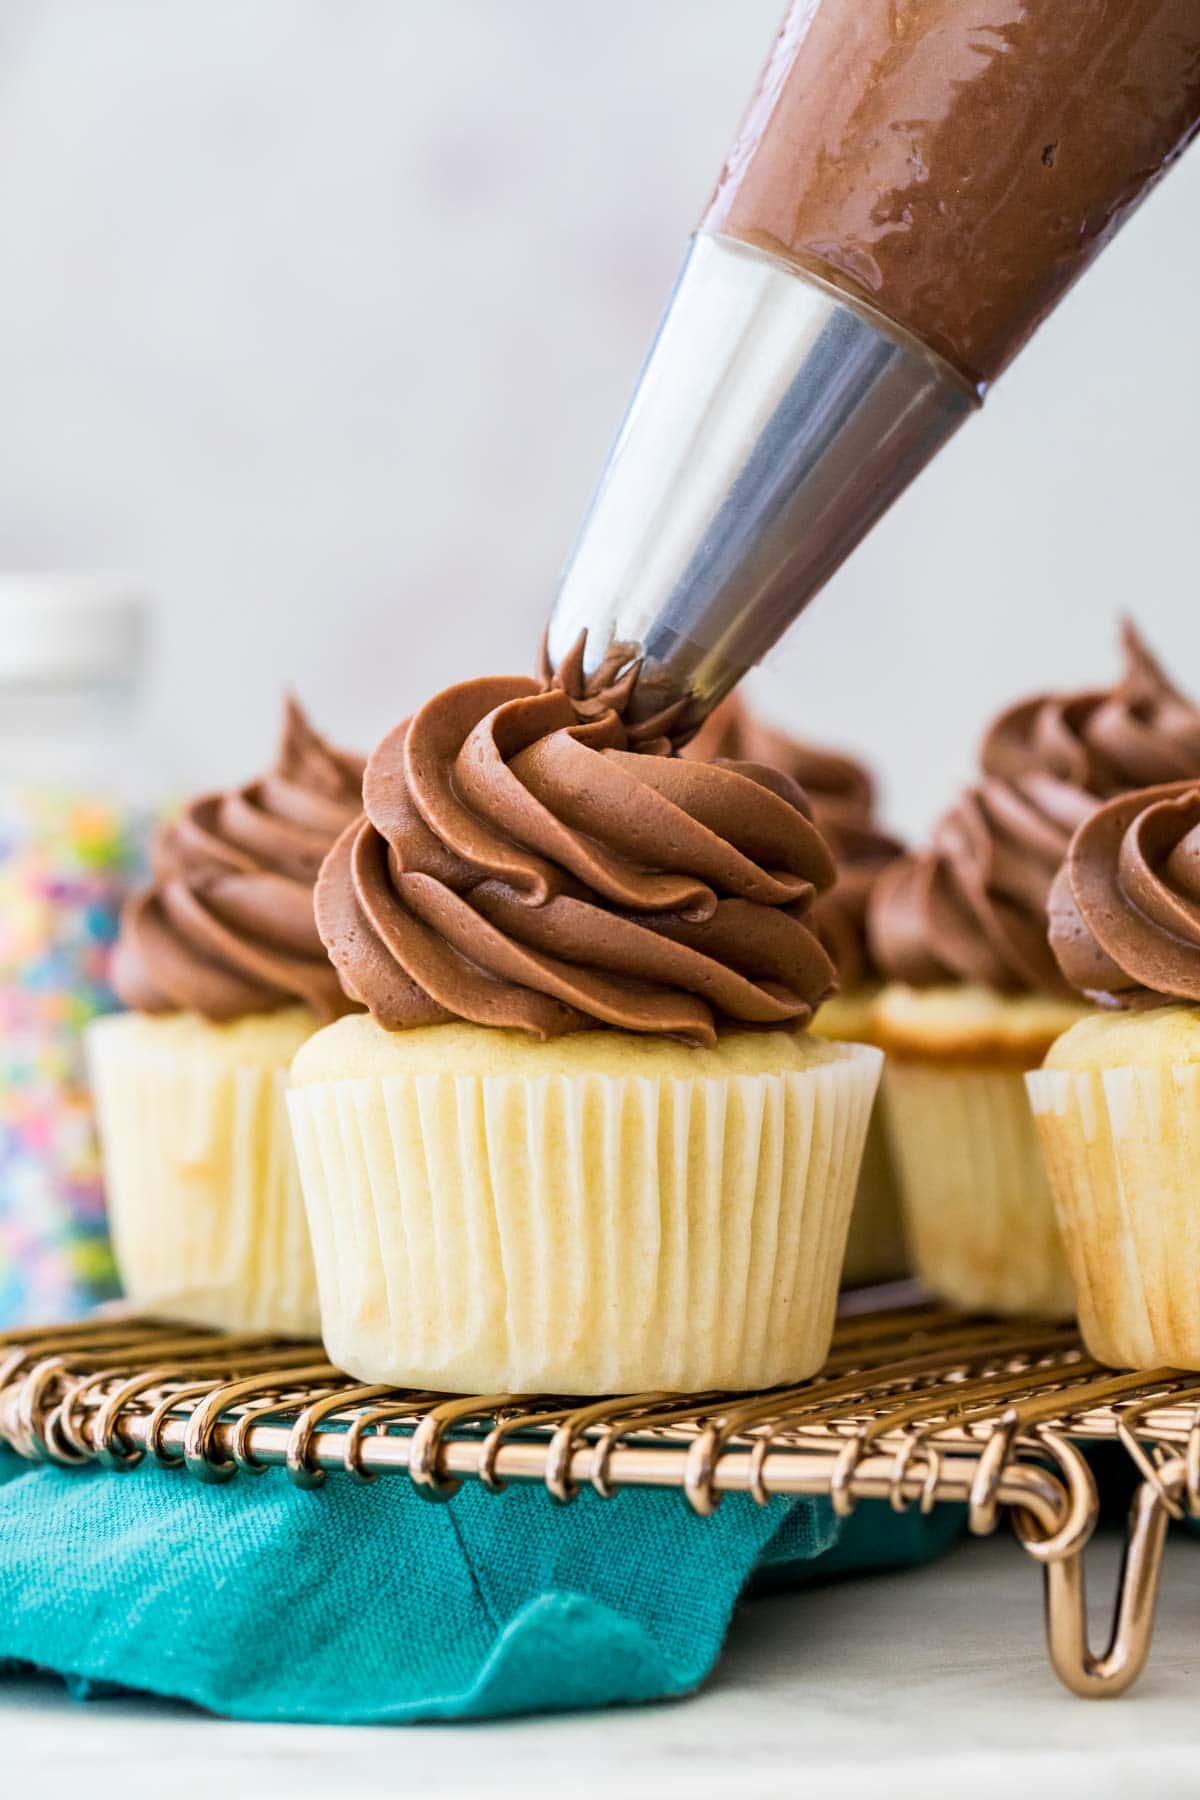 Piping chocolate frosting on a cupcake.